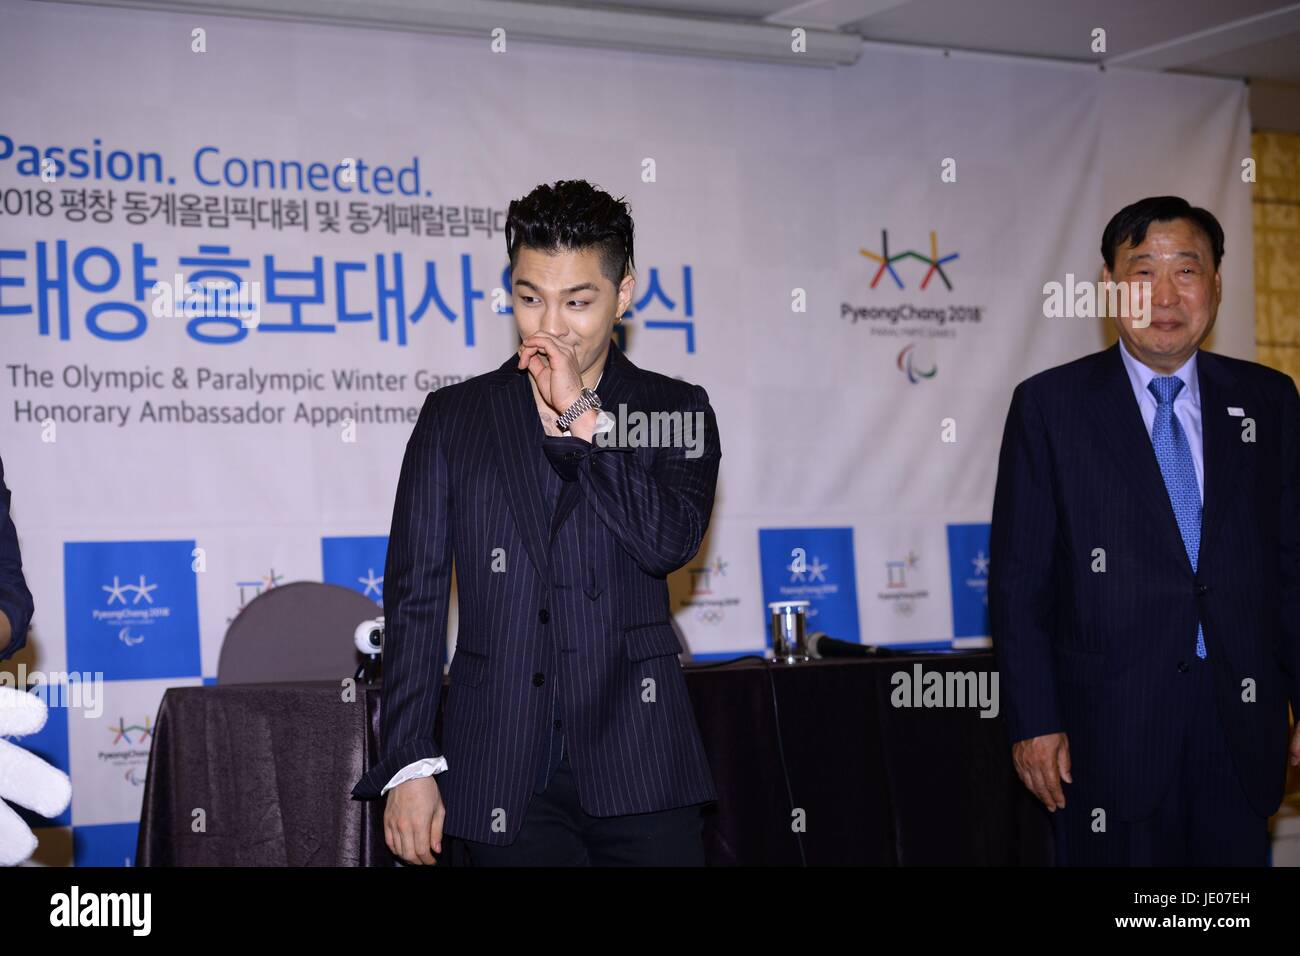 BIGBANG Tae Yang accepted the appointment from the committee of Winter Olympic Games as propaganda ambassador in Seoul, Korea on 21th June, 2017.(China and Korea Rights Out) Stock Photo